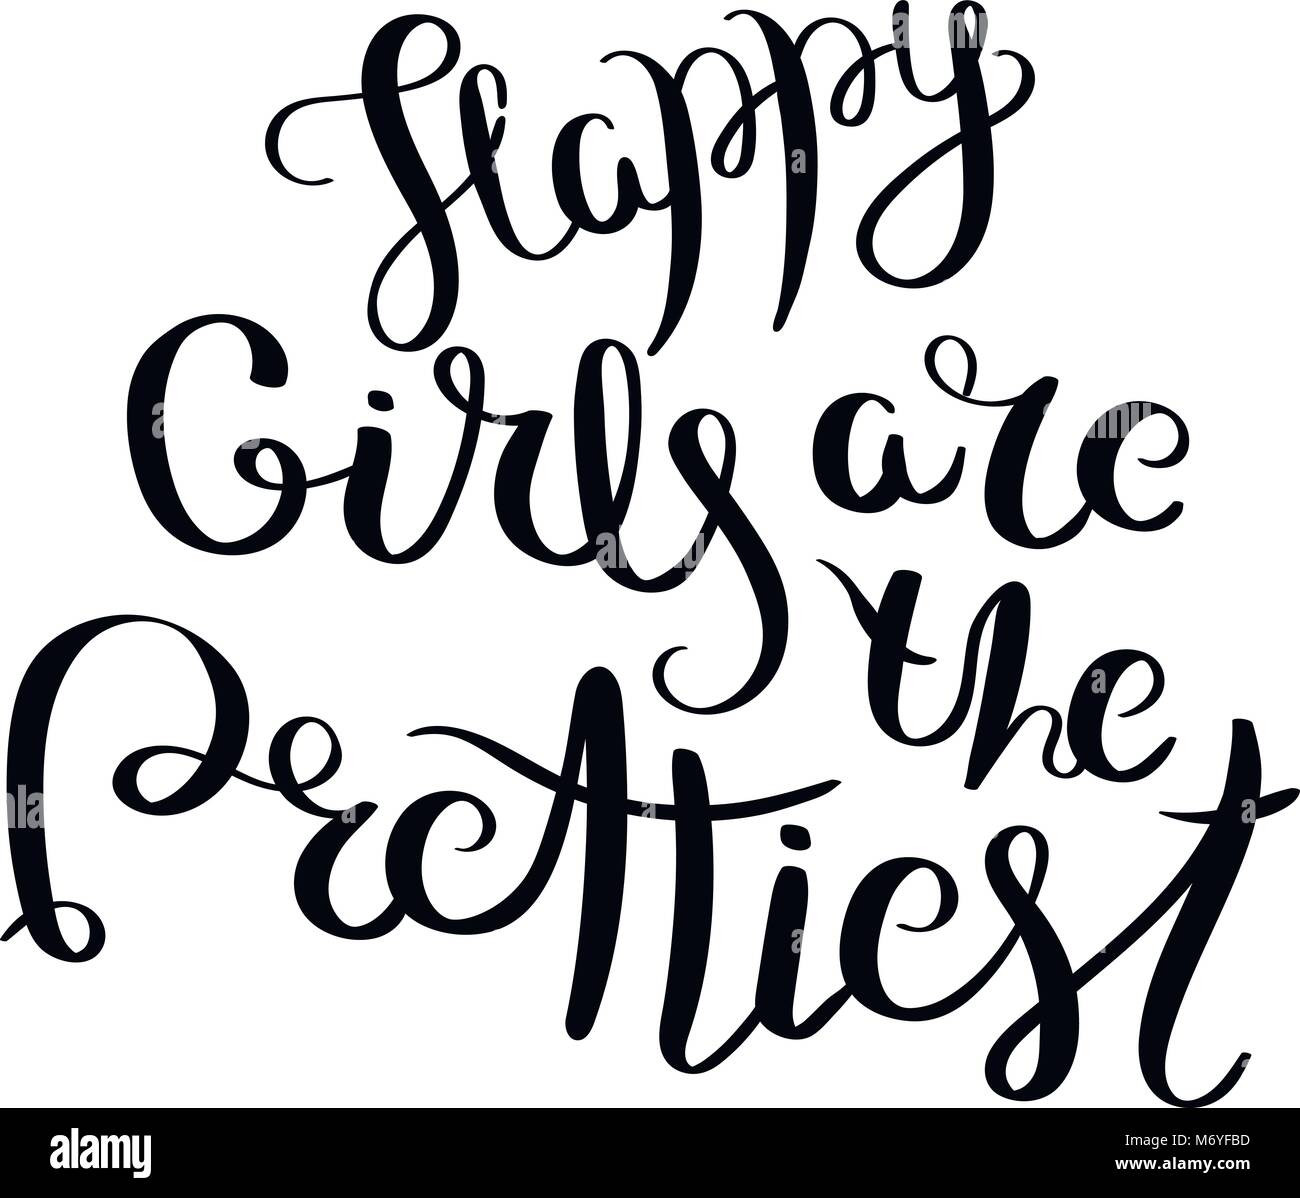 Happy girls are the prettiest. Hand written calligraphy quote motivation for life and happiness. For postcard, poster, prints, cards graphic design. Stock Vector